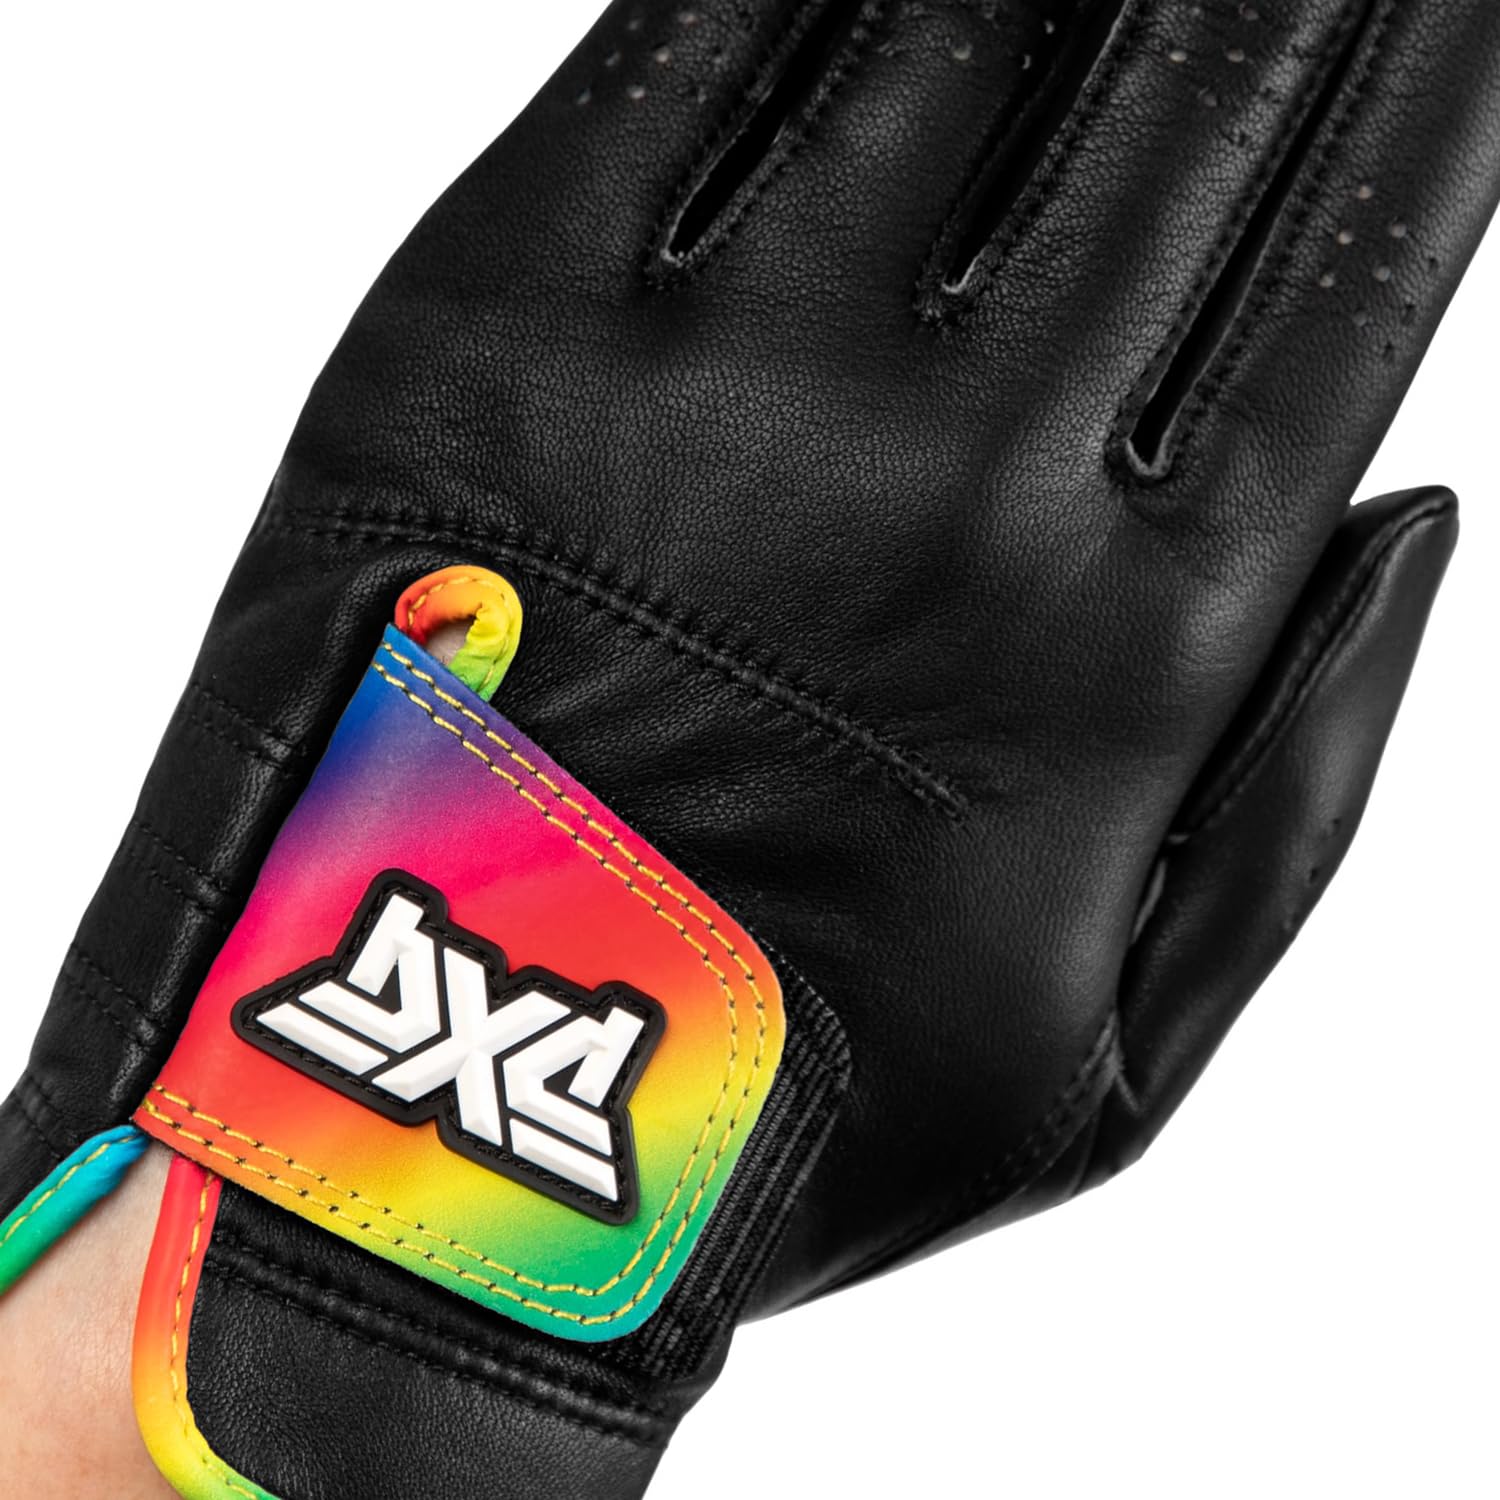 PXG Women's Pride Premium Fit Players Golf Glove - 100% Cabretta Leather with Cotton-Based Elastic Wristband